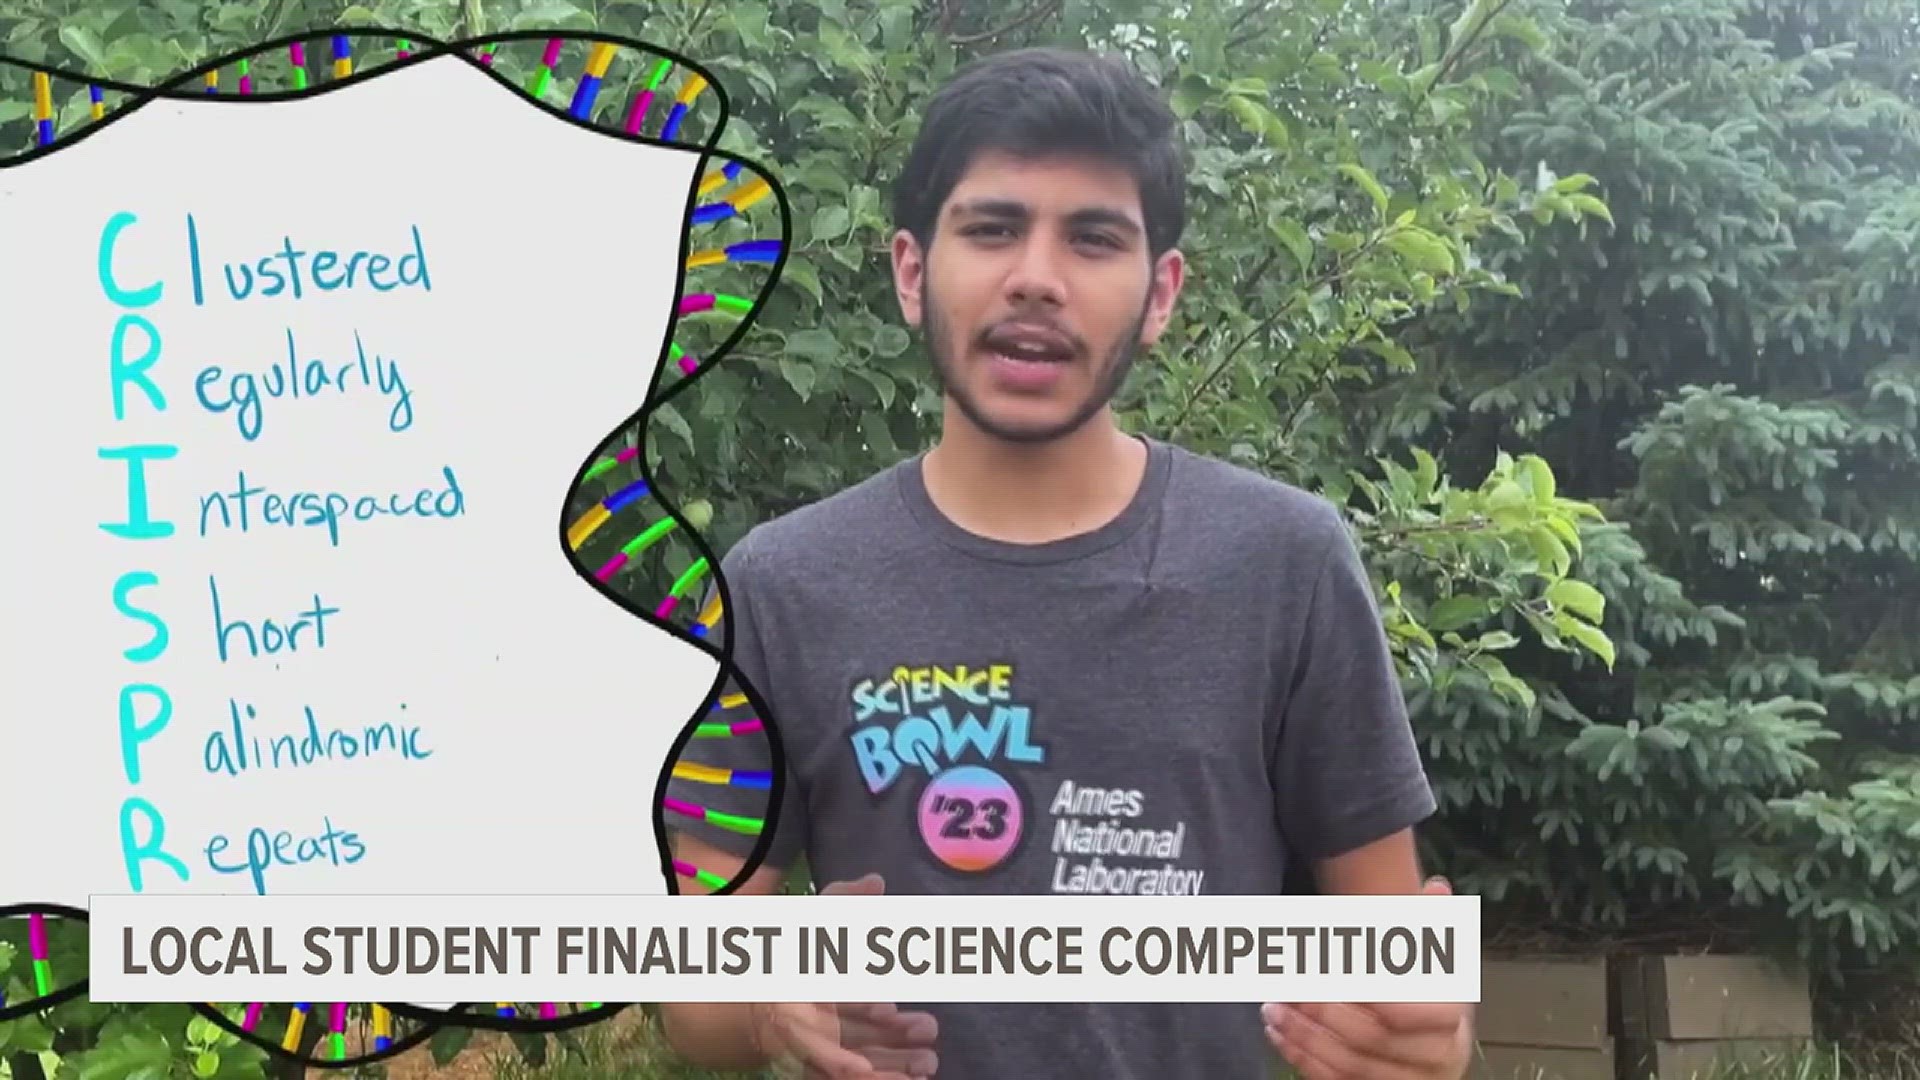 Himanchu Johngid is one of 15 students remaining in the Breakthrough Junior Challenge. His project focused on CRISPR technology, and took a month to create.